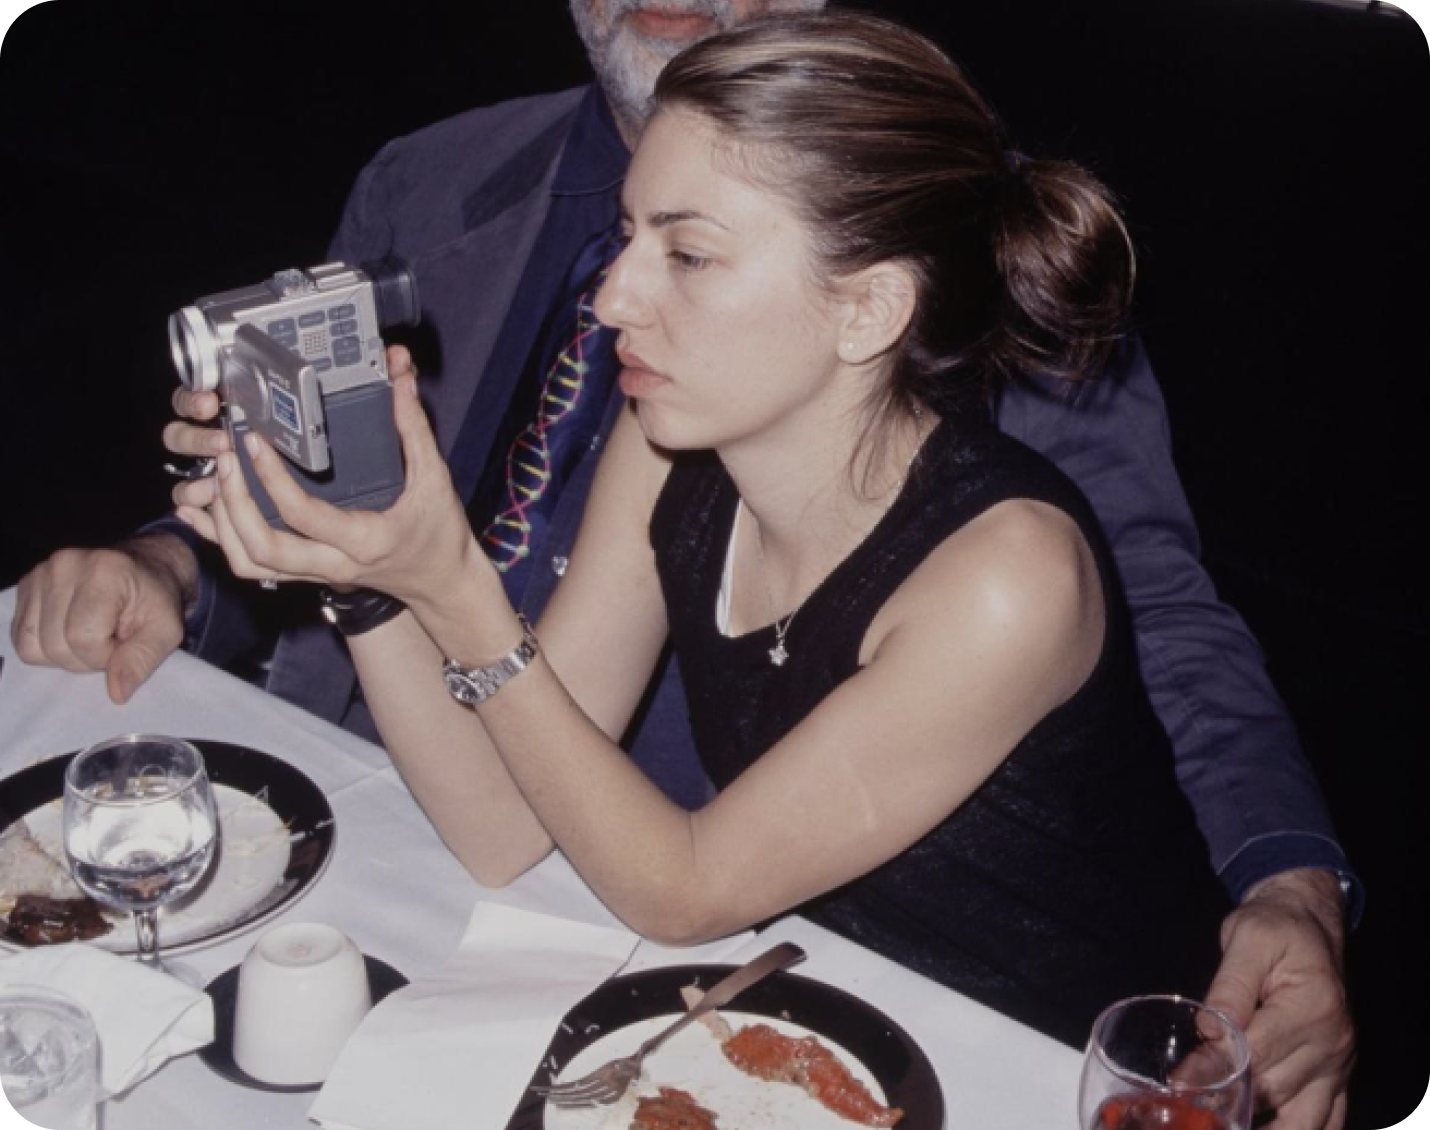 90s Fashion: Sofia Coppola's casual street style in iconic outfits